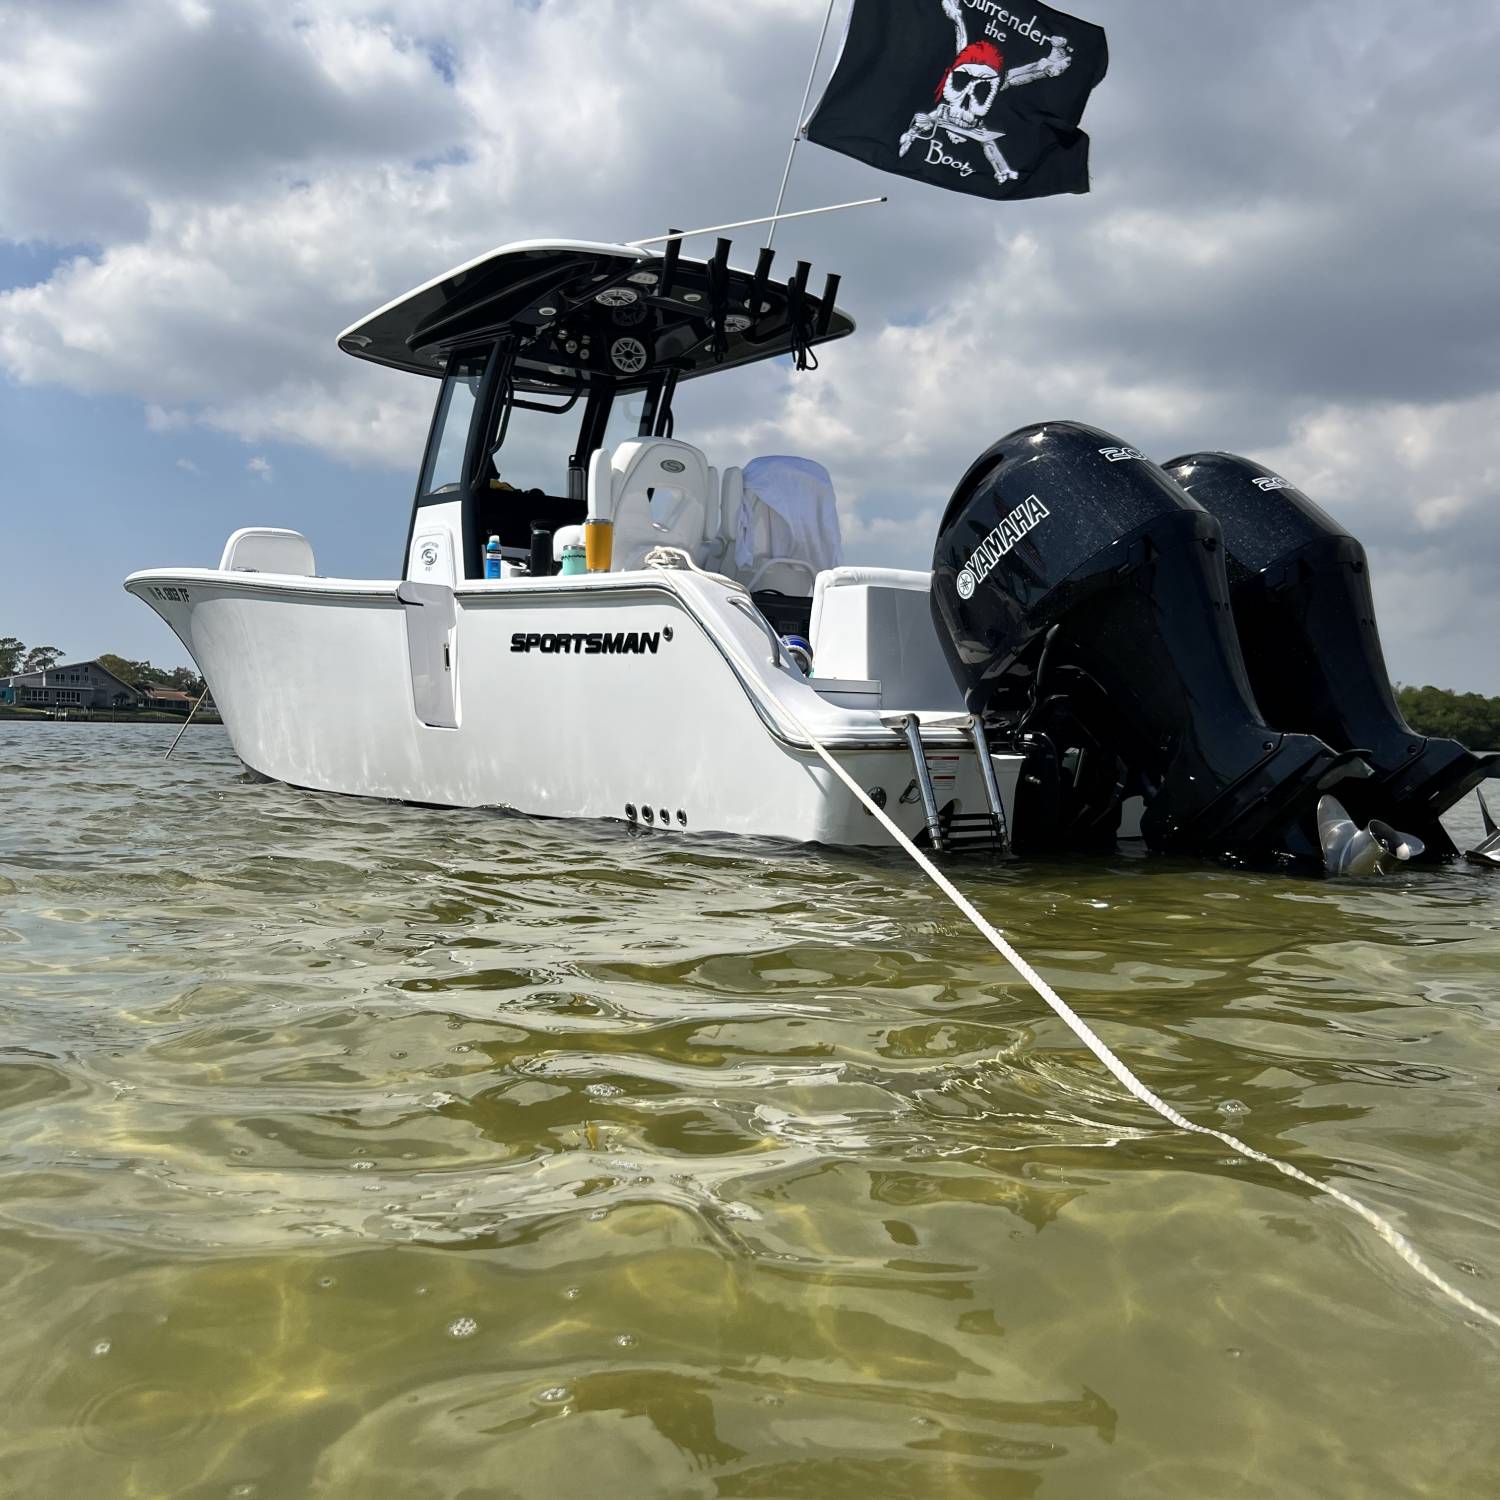 Title: Florida Winters - On board their Sportsman Heritage 261 Center Console - Location: Weedon Island. Participating in the Photo Contest #SportsmanMarch2023